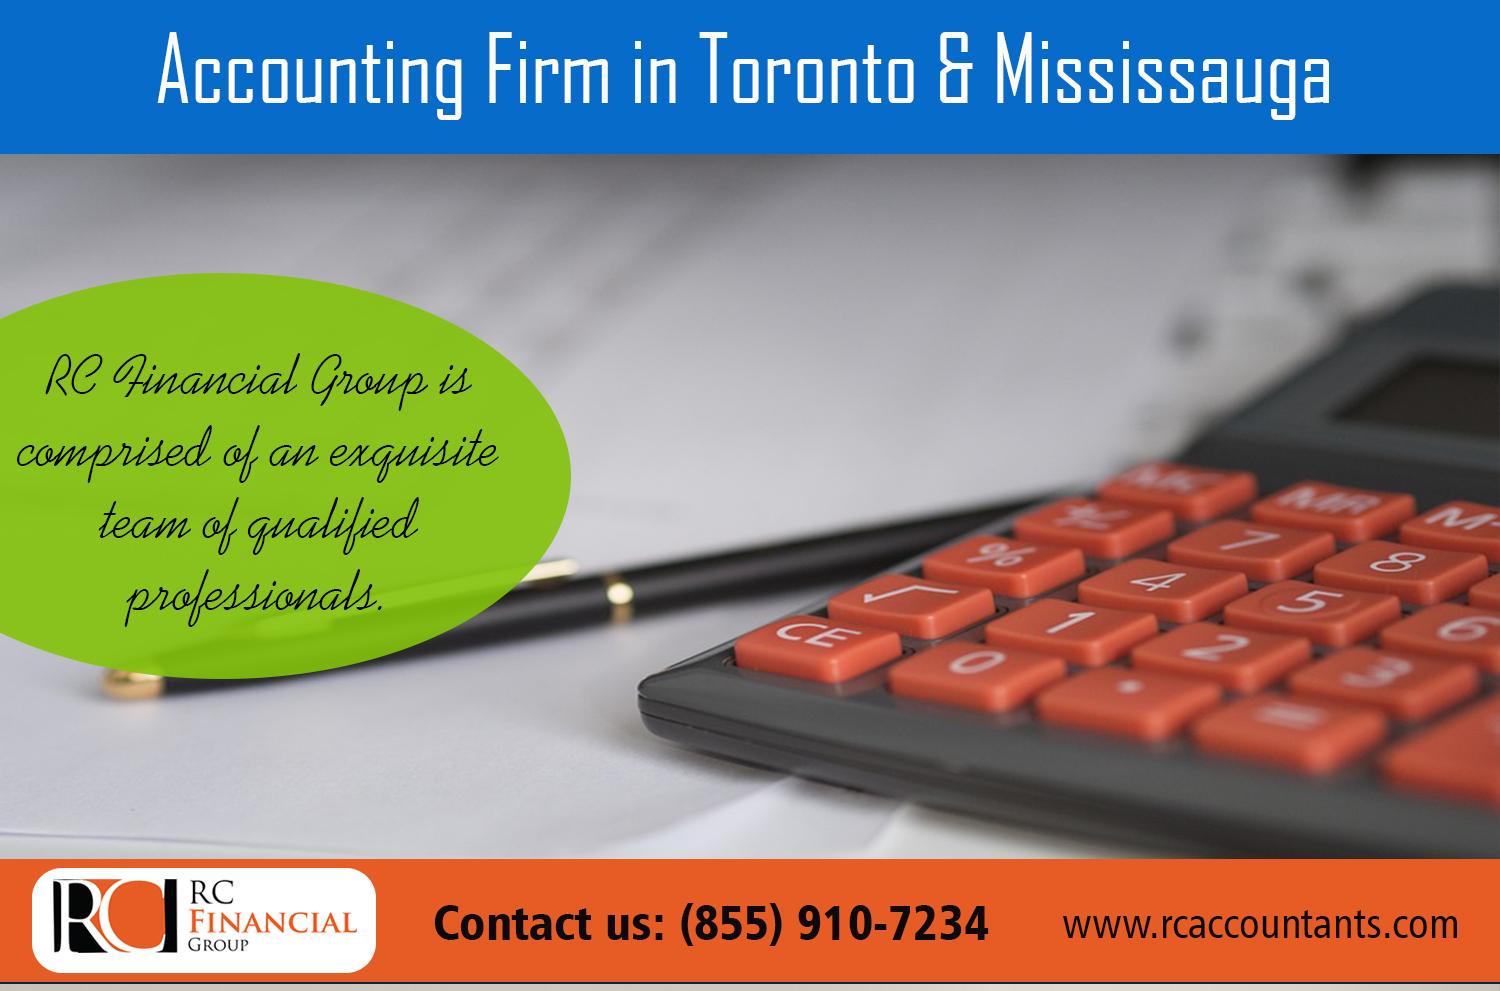 Accounting Firm in Toronto & Mississauga| http://www.rcaccountants.com/| +1 855-910-7234